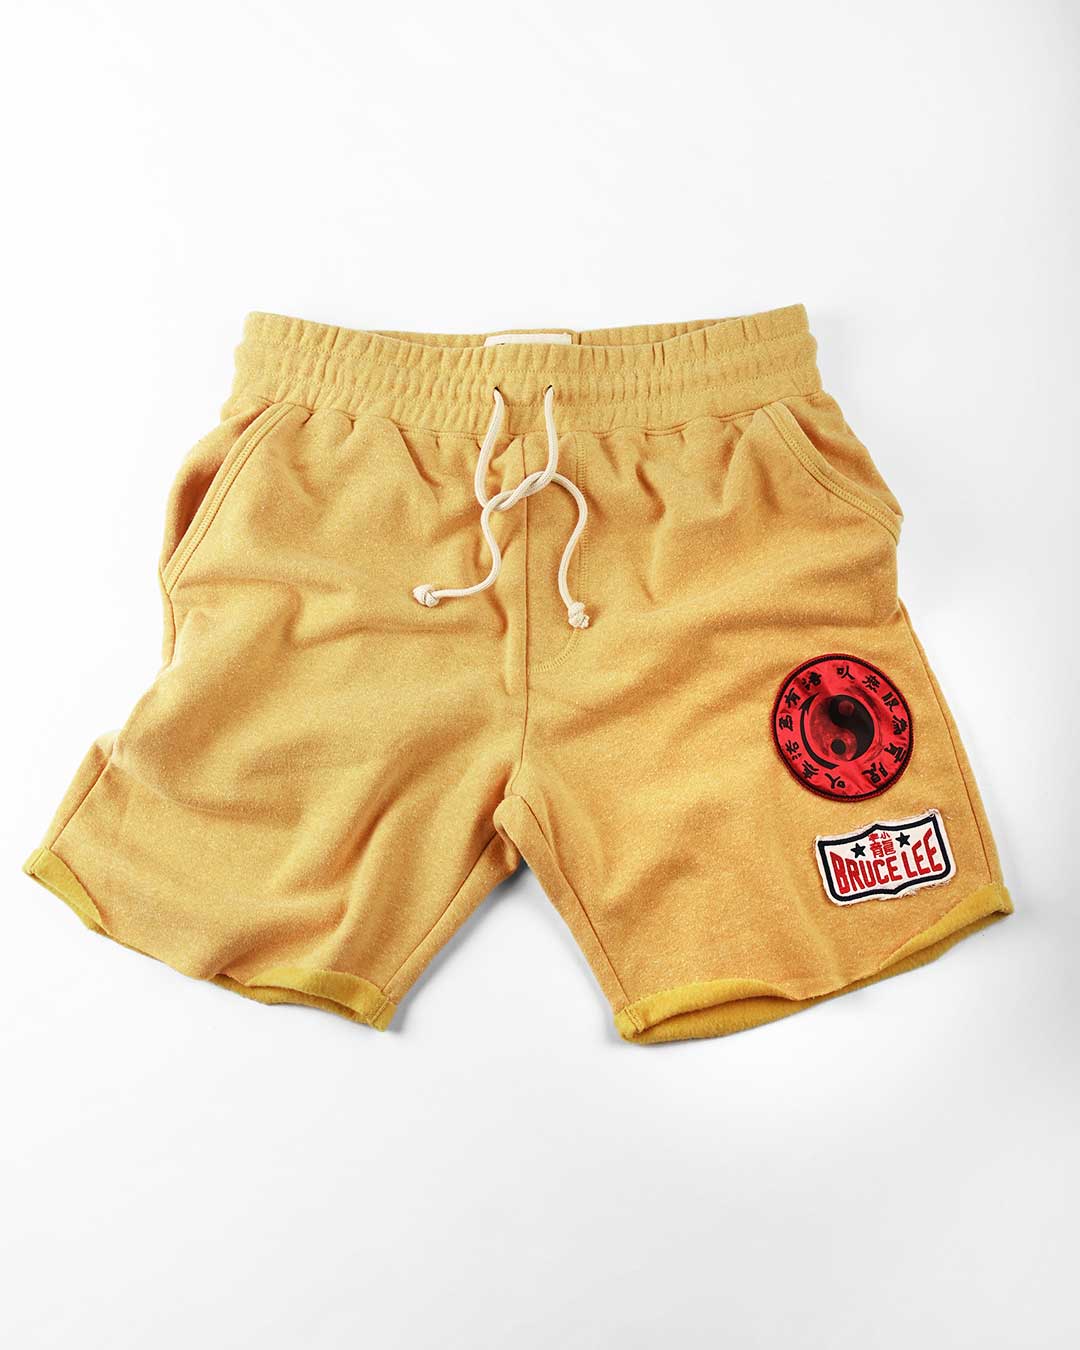 Bruce Lee JKD Gold Shorts - Roots of Fight Canada